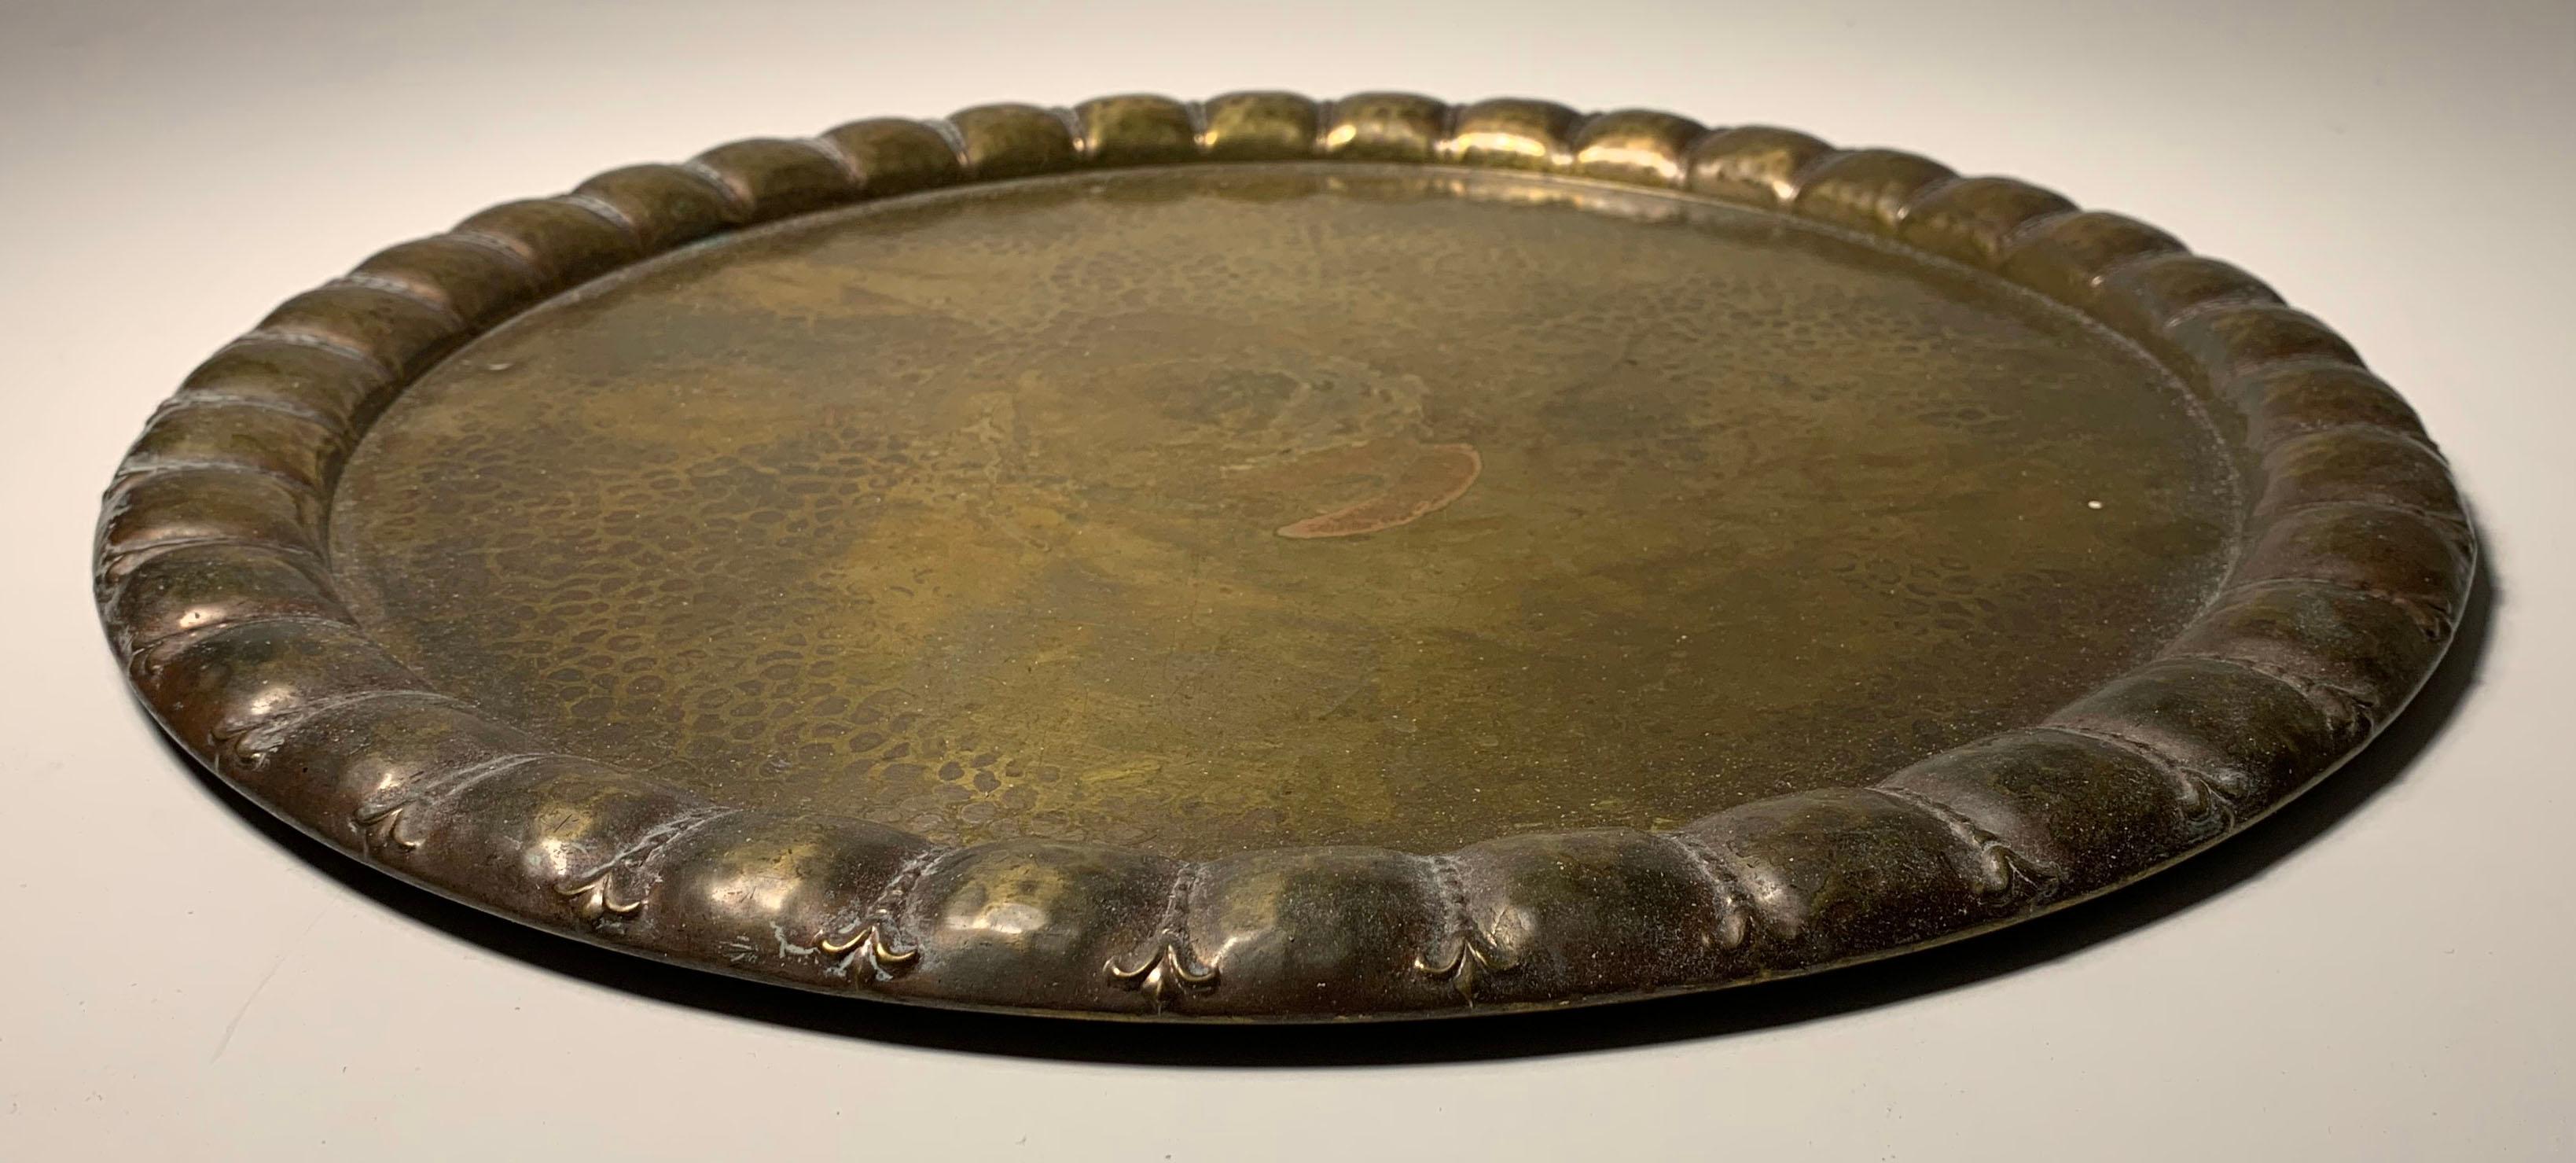 Arts and Crafts Early WMF Large Hammered Brass Charger or Tray For Sale